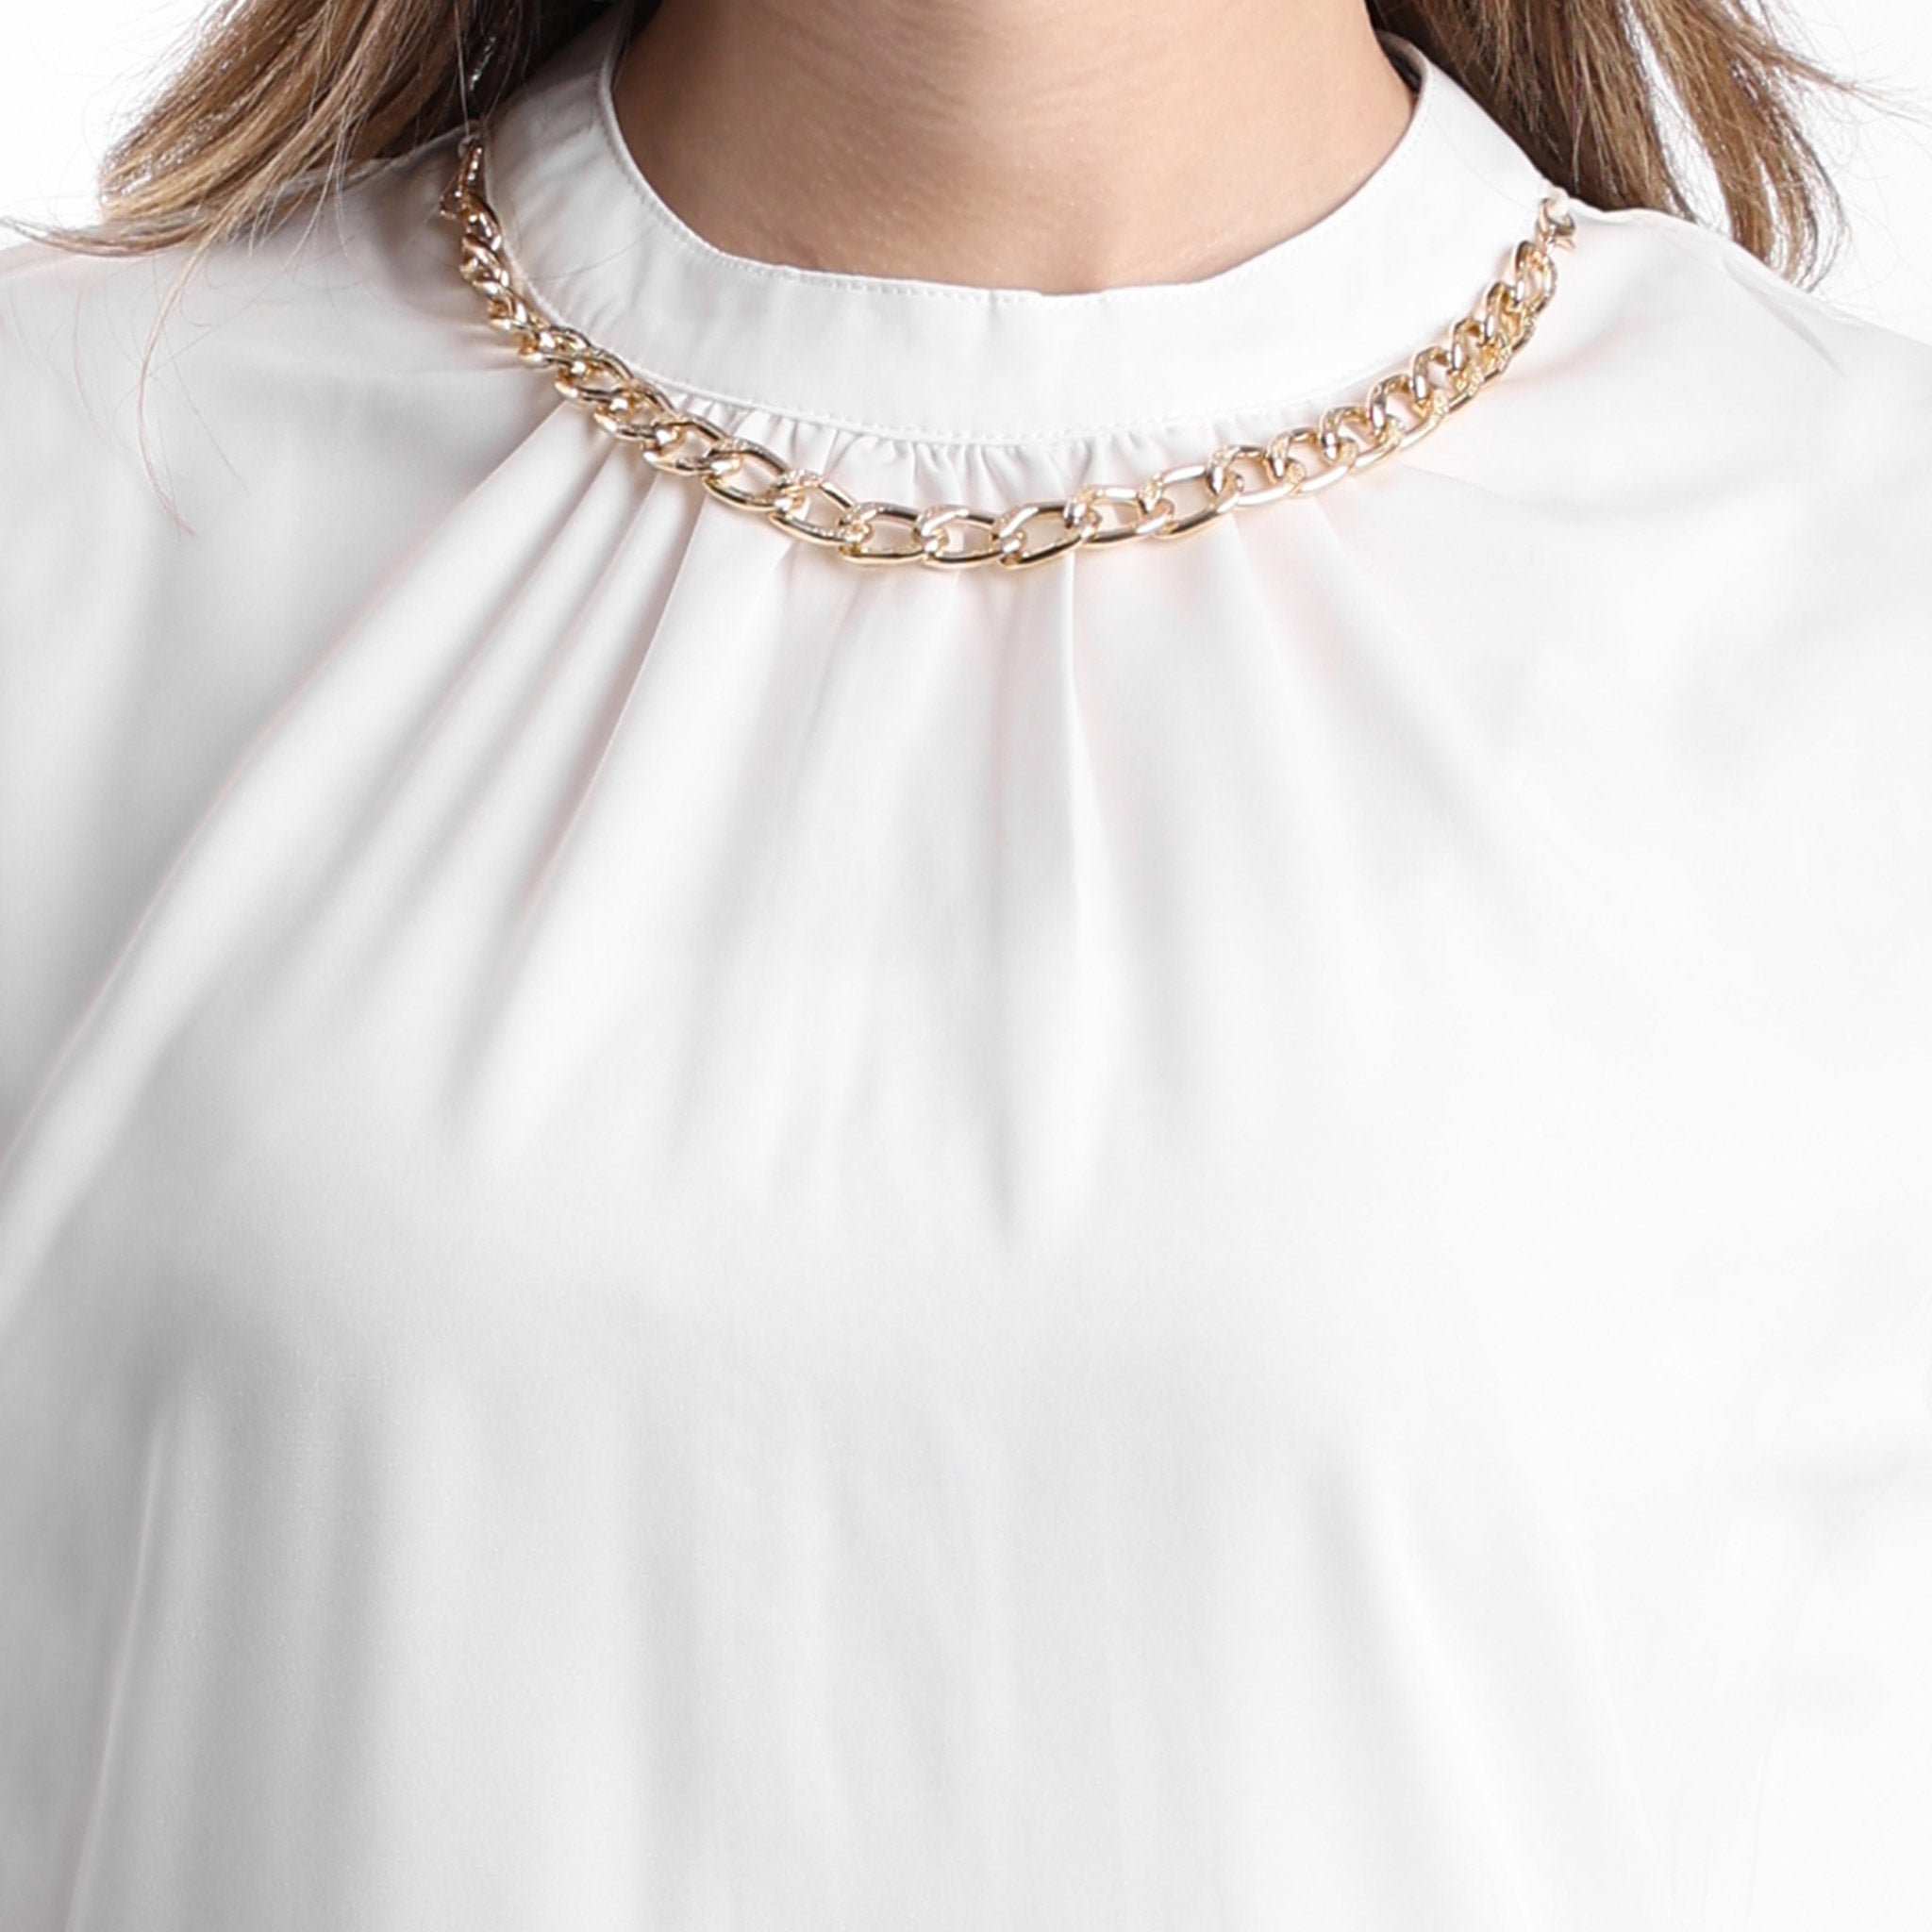 Satin Cut Blouse with Chain